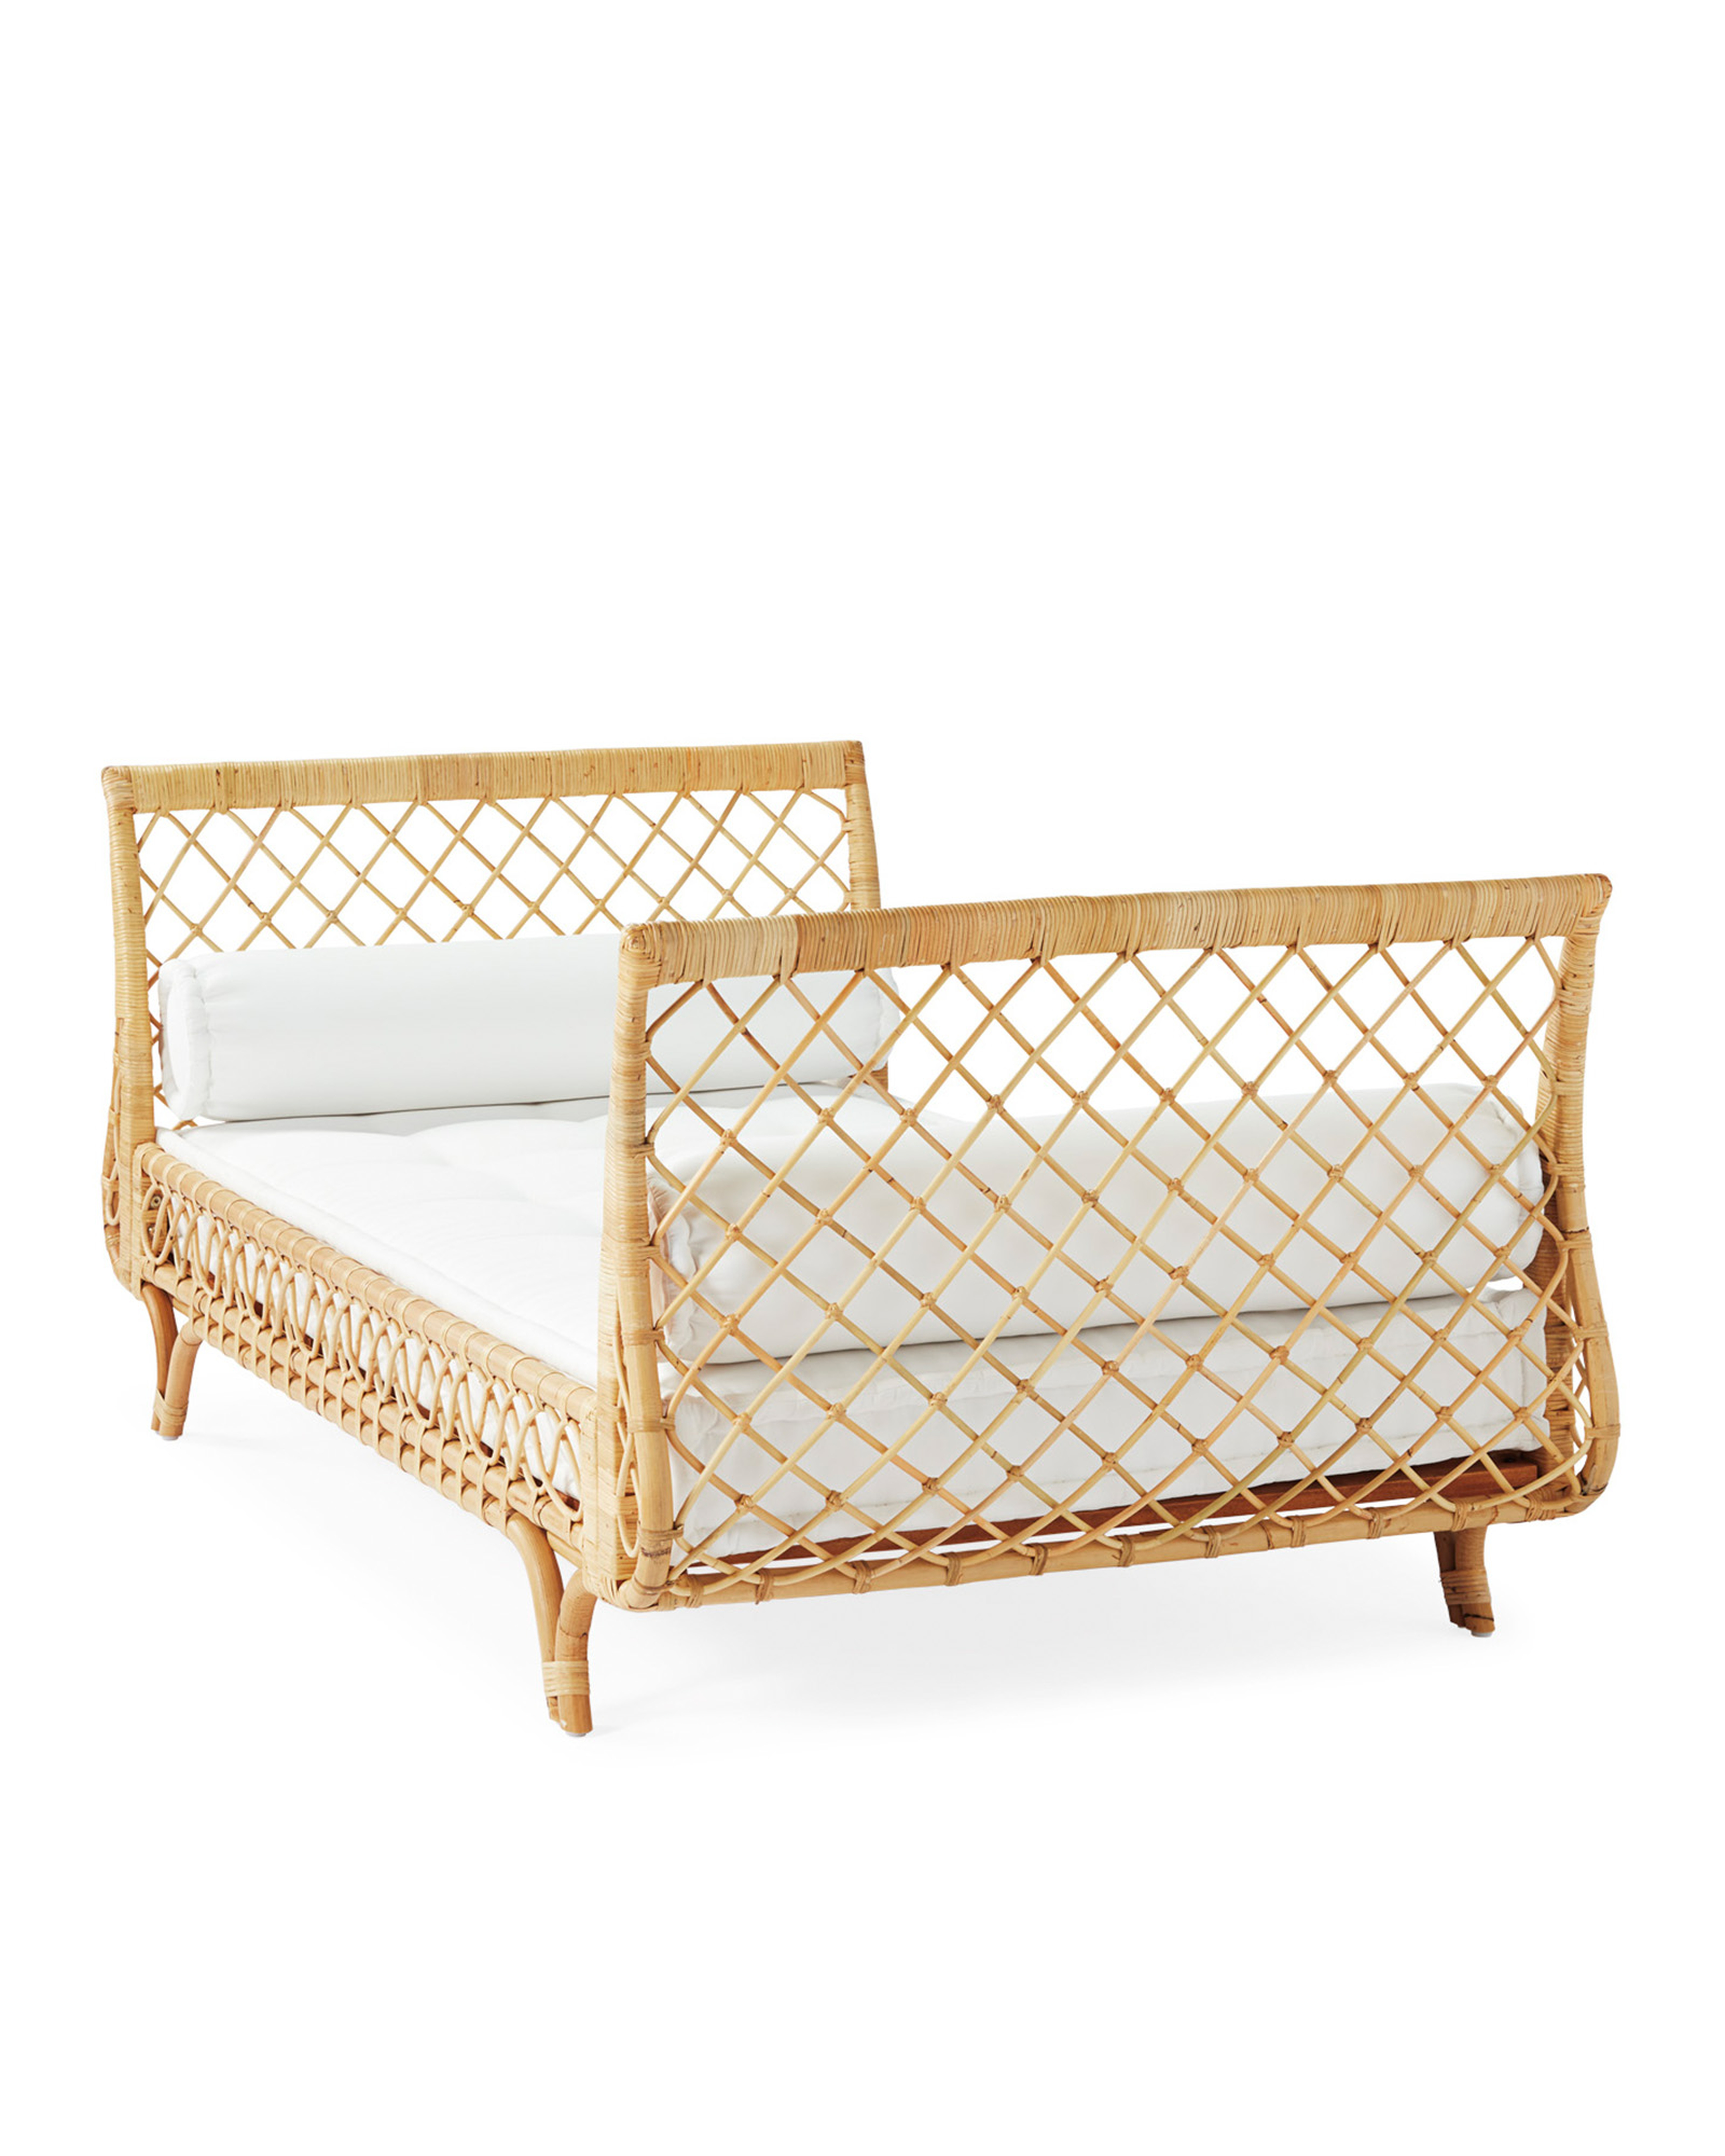 Avalon Daybed - Serena and Lily